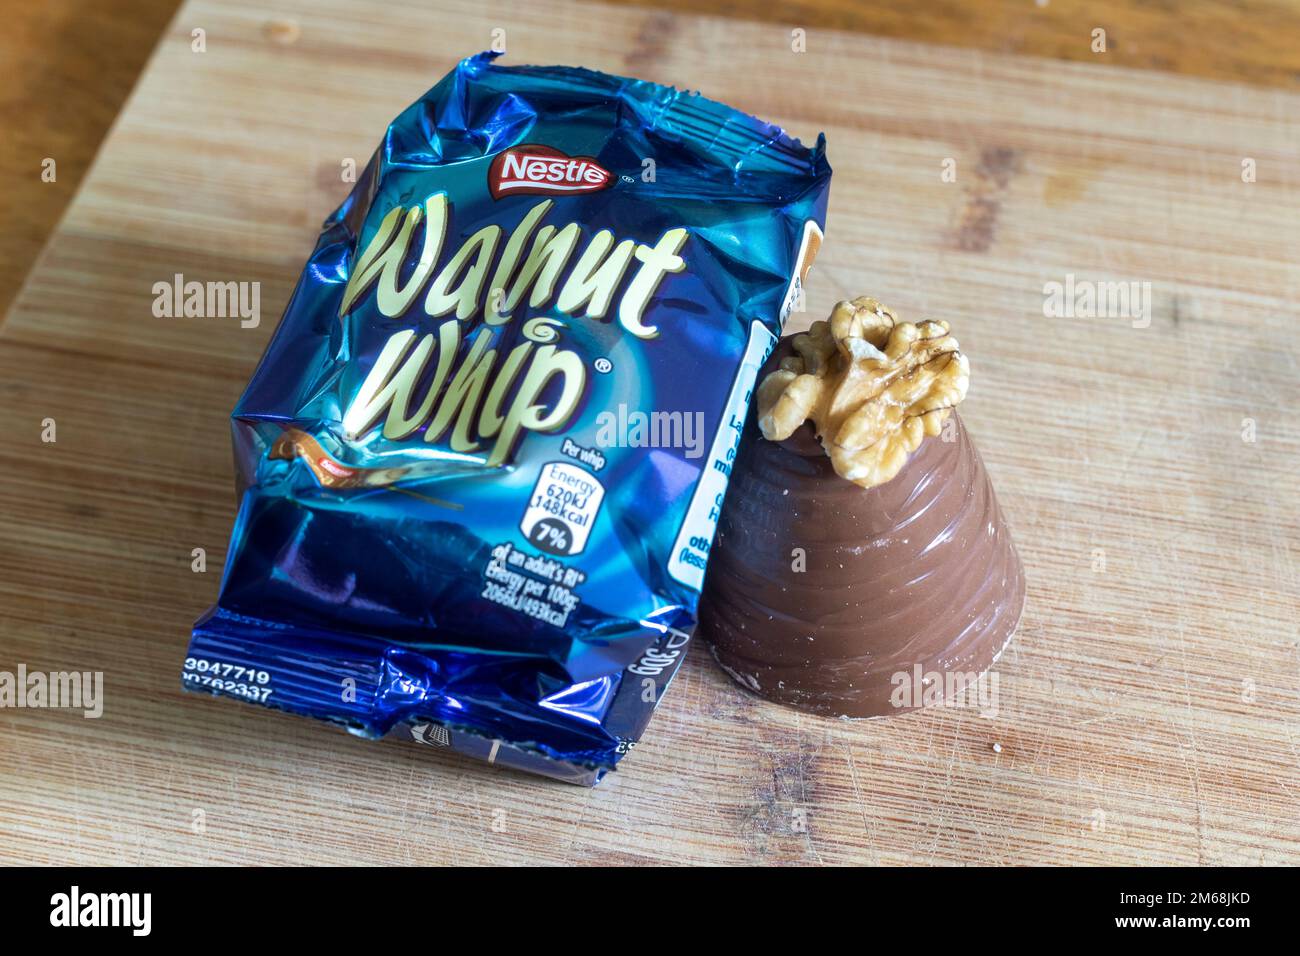 A Walnut whip, a sweet treat made by Nestle consisting of chocolate filled with marshmallow and topped with a walnut. Stock Photo